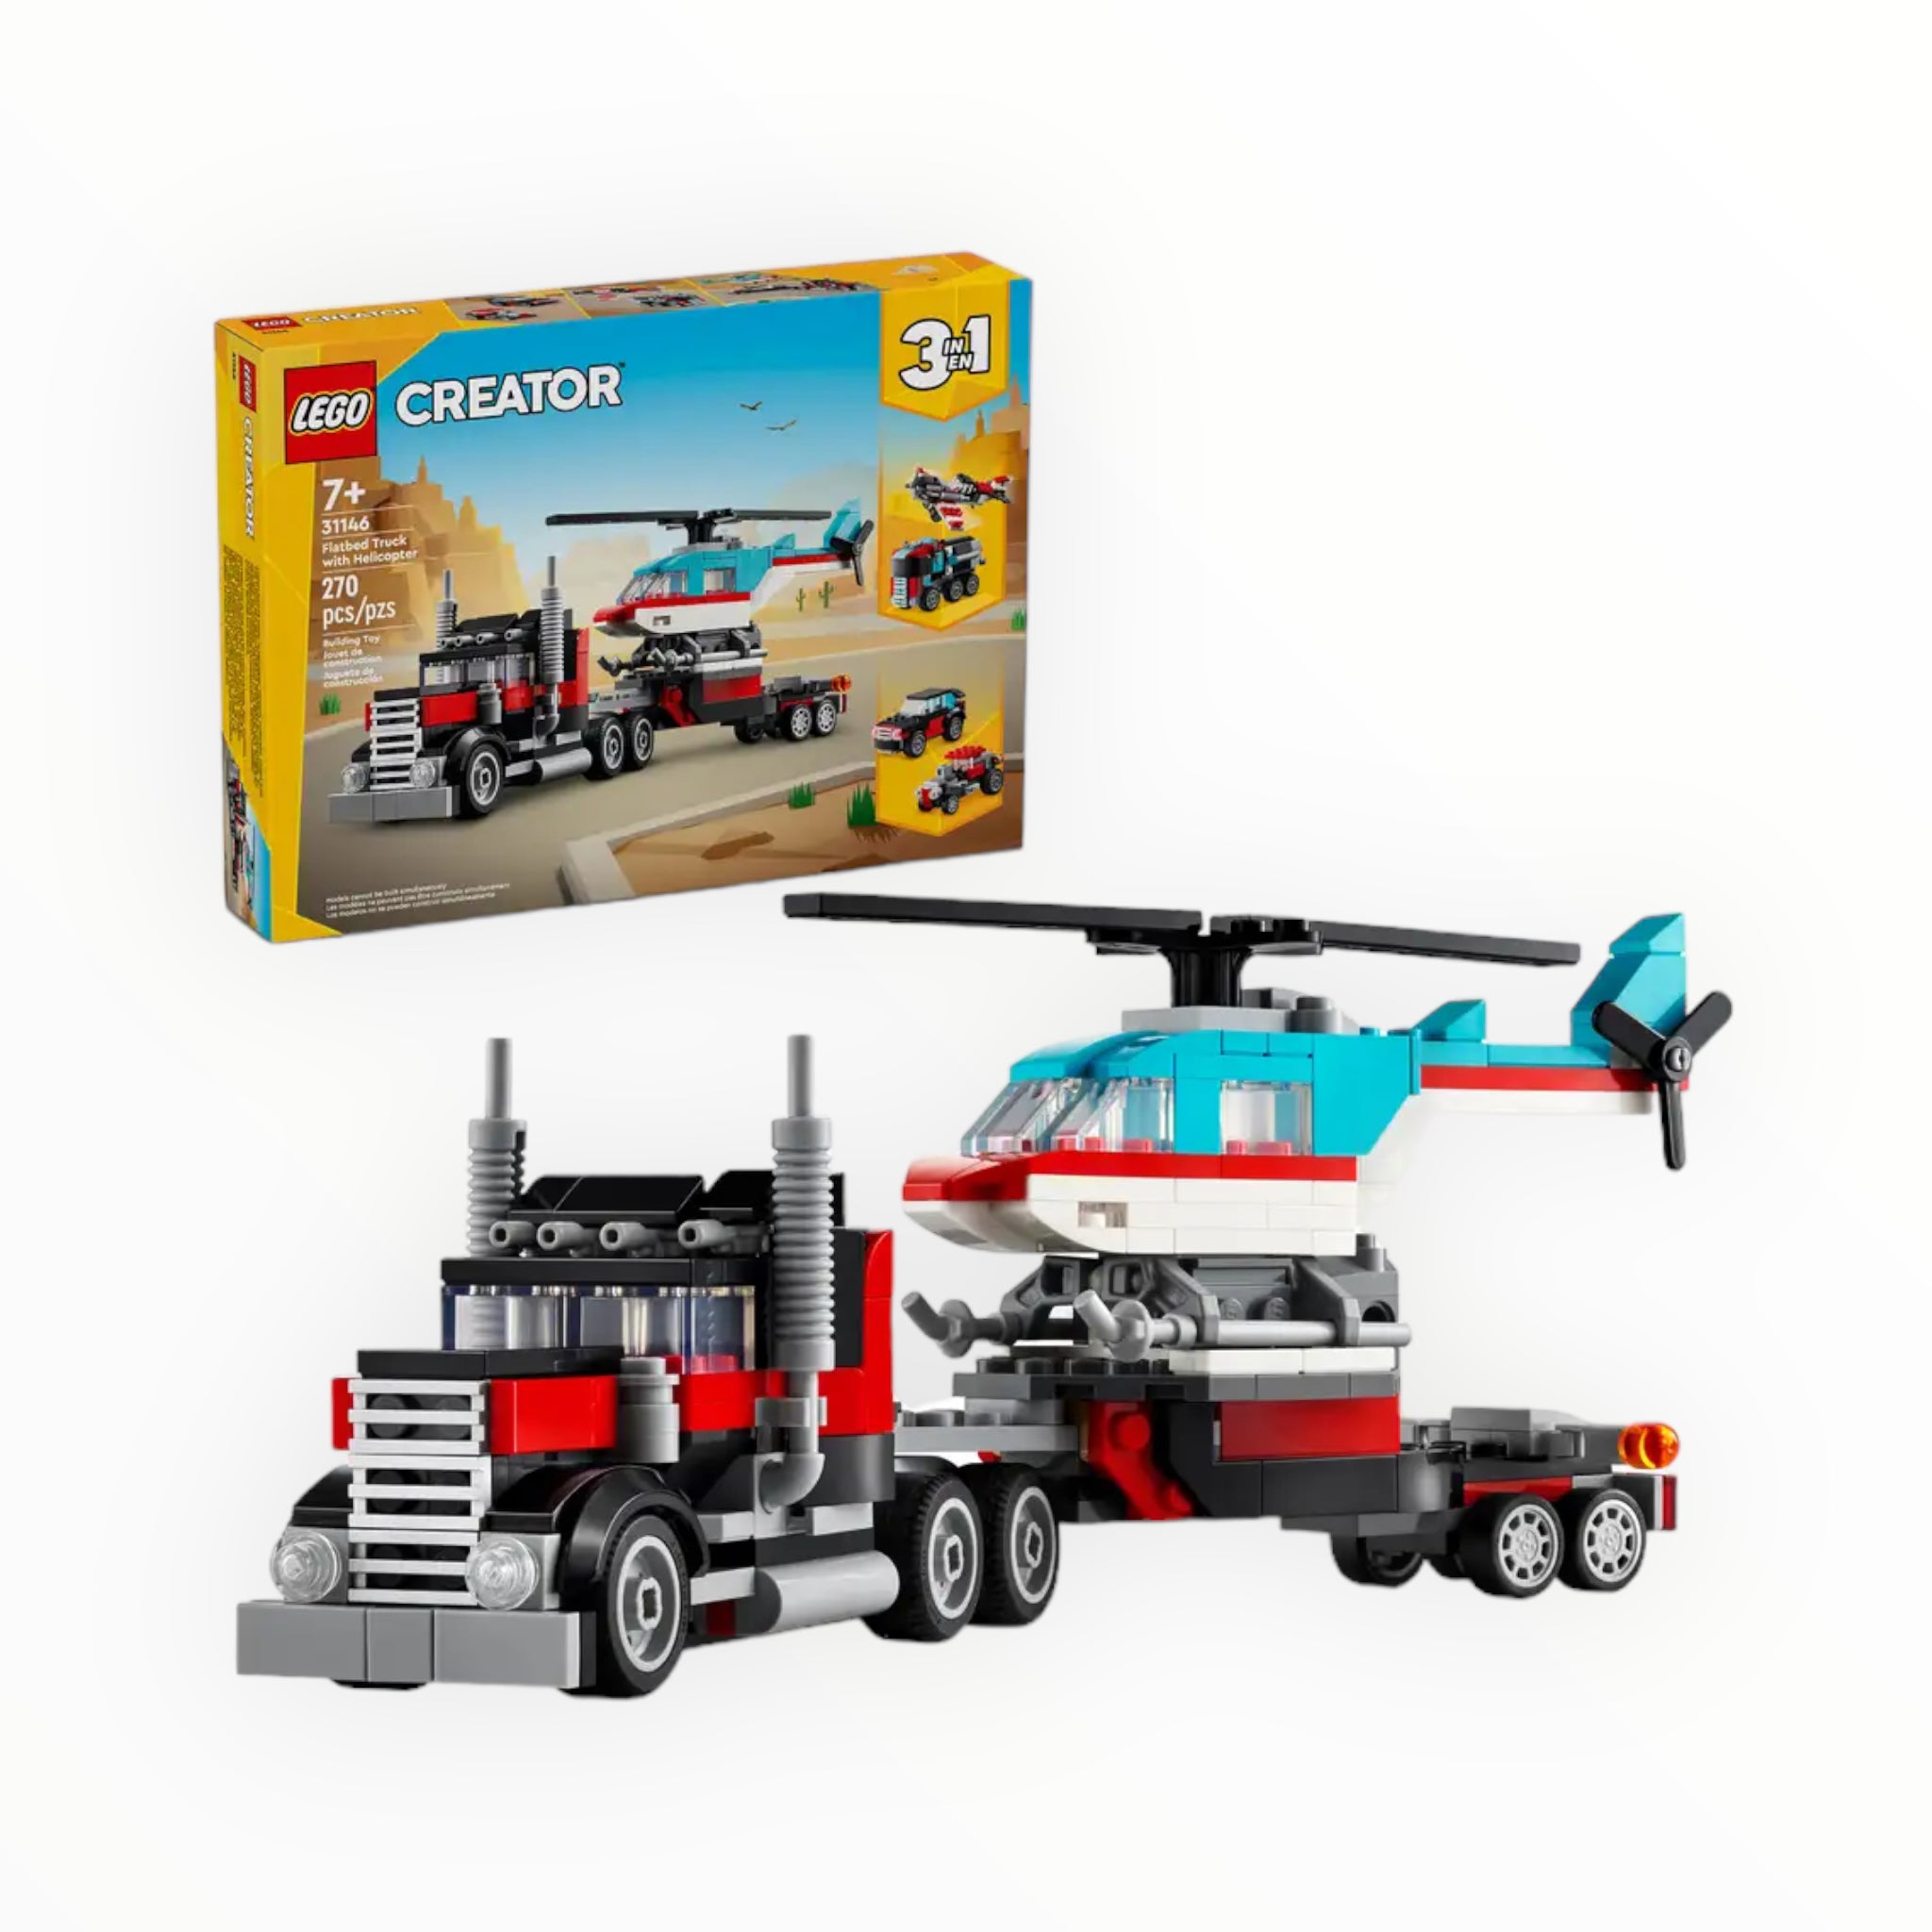 31146 Creator Flatbed Truck with Helicopter